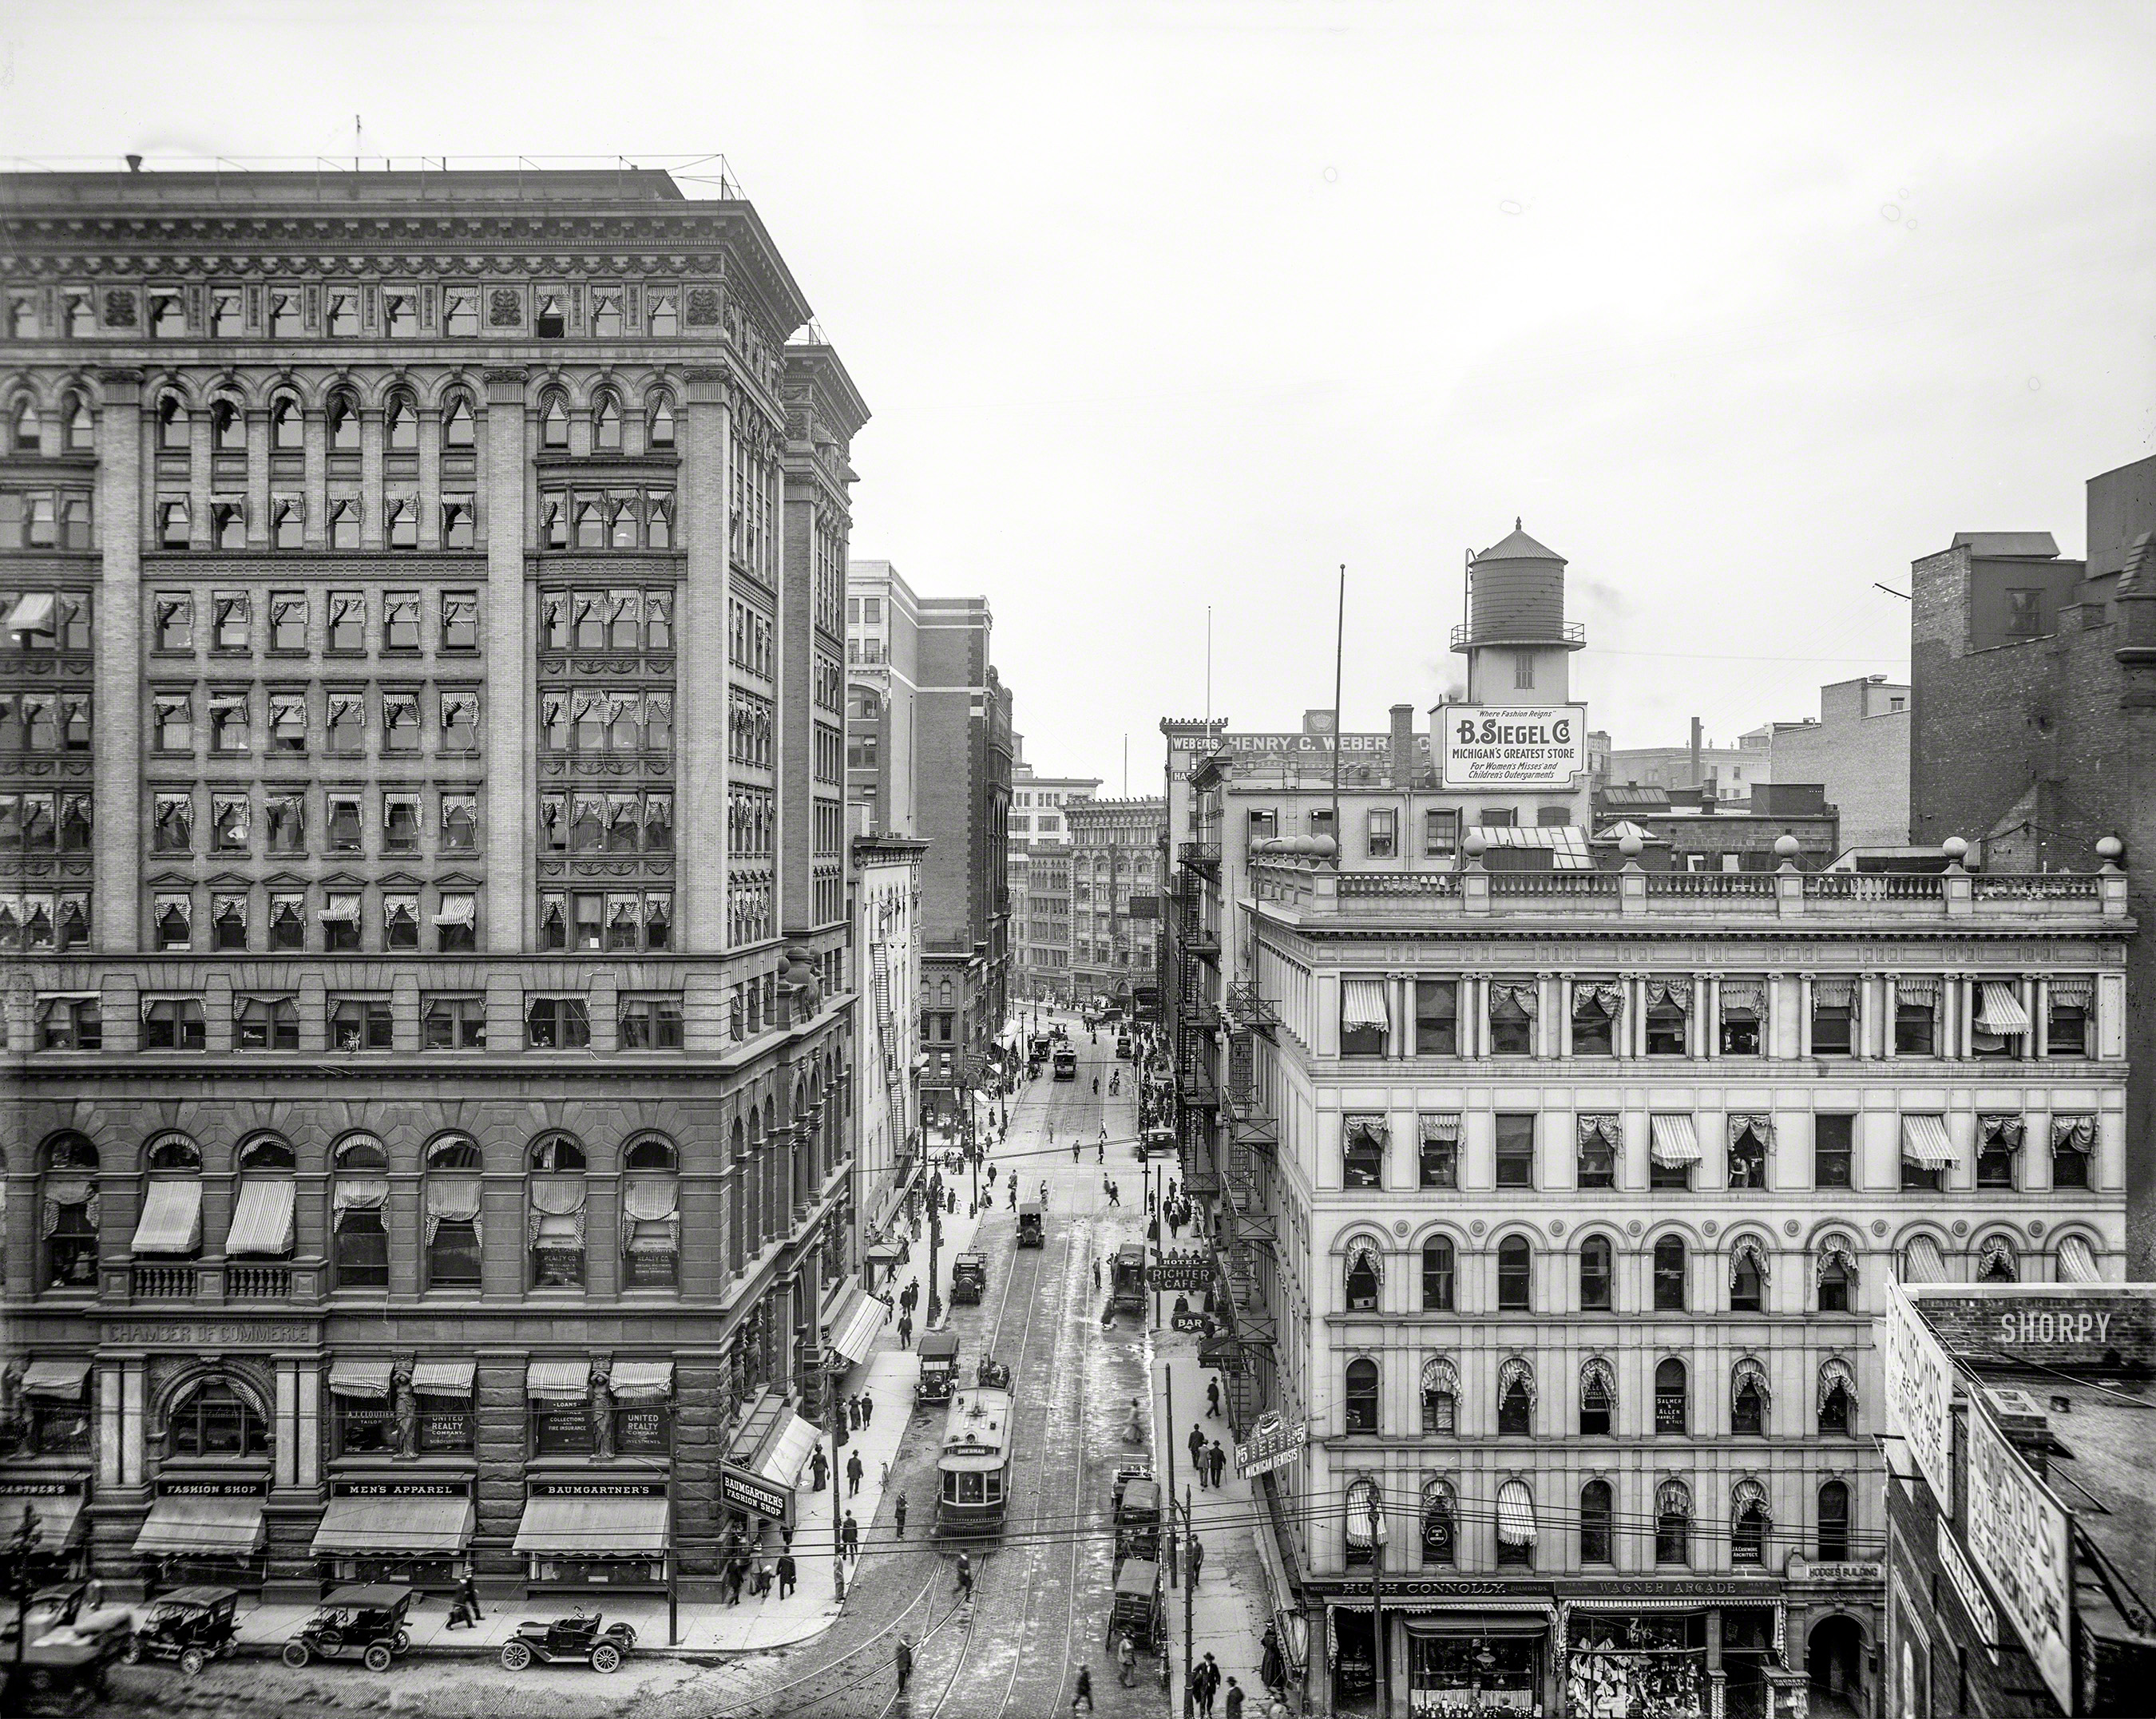 Detroit circa 1910. "Chamber of Commerce, State and Griswold streets." With the Hotel Richter and B. Siegel department store on State Street in supporting roles. Our title comes from the wonderfully graphic sign for Michigan Dentists. 8x10 inch glass negative, Detroit Publishing Company. View full size.